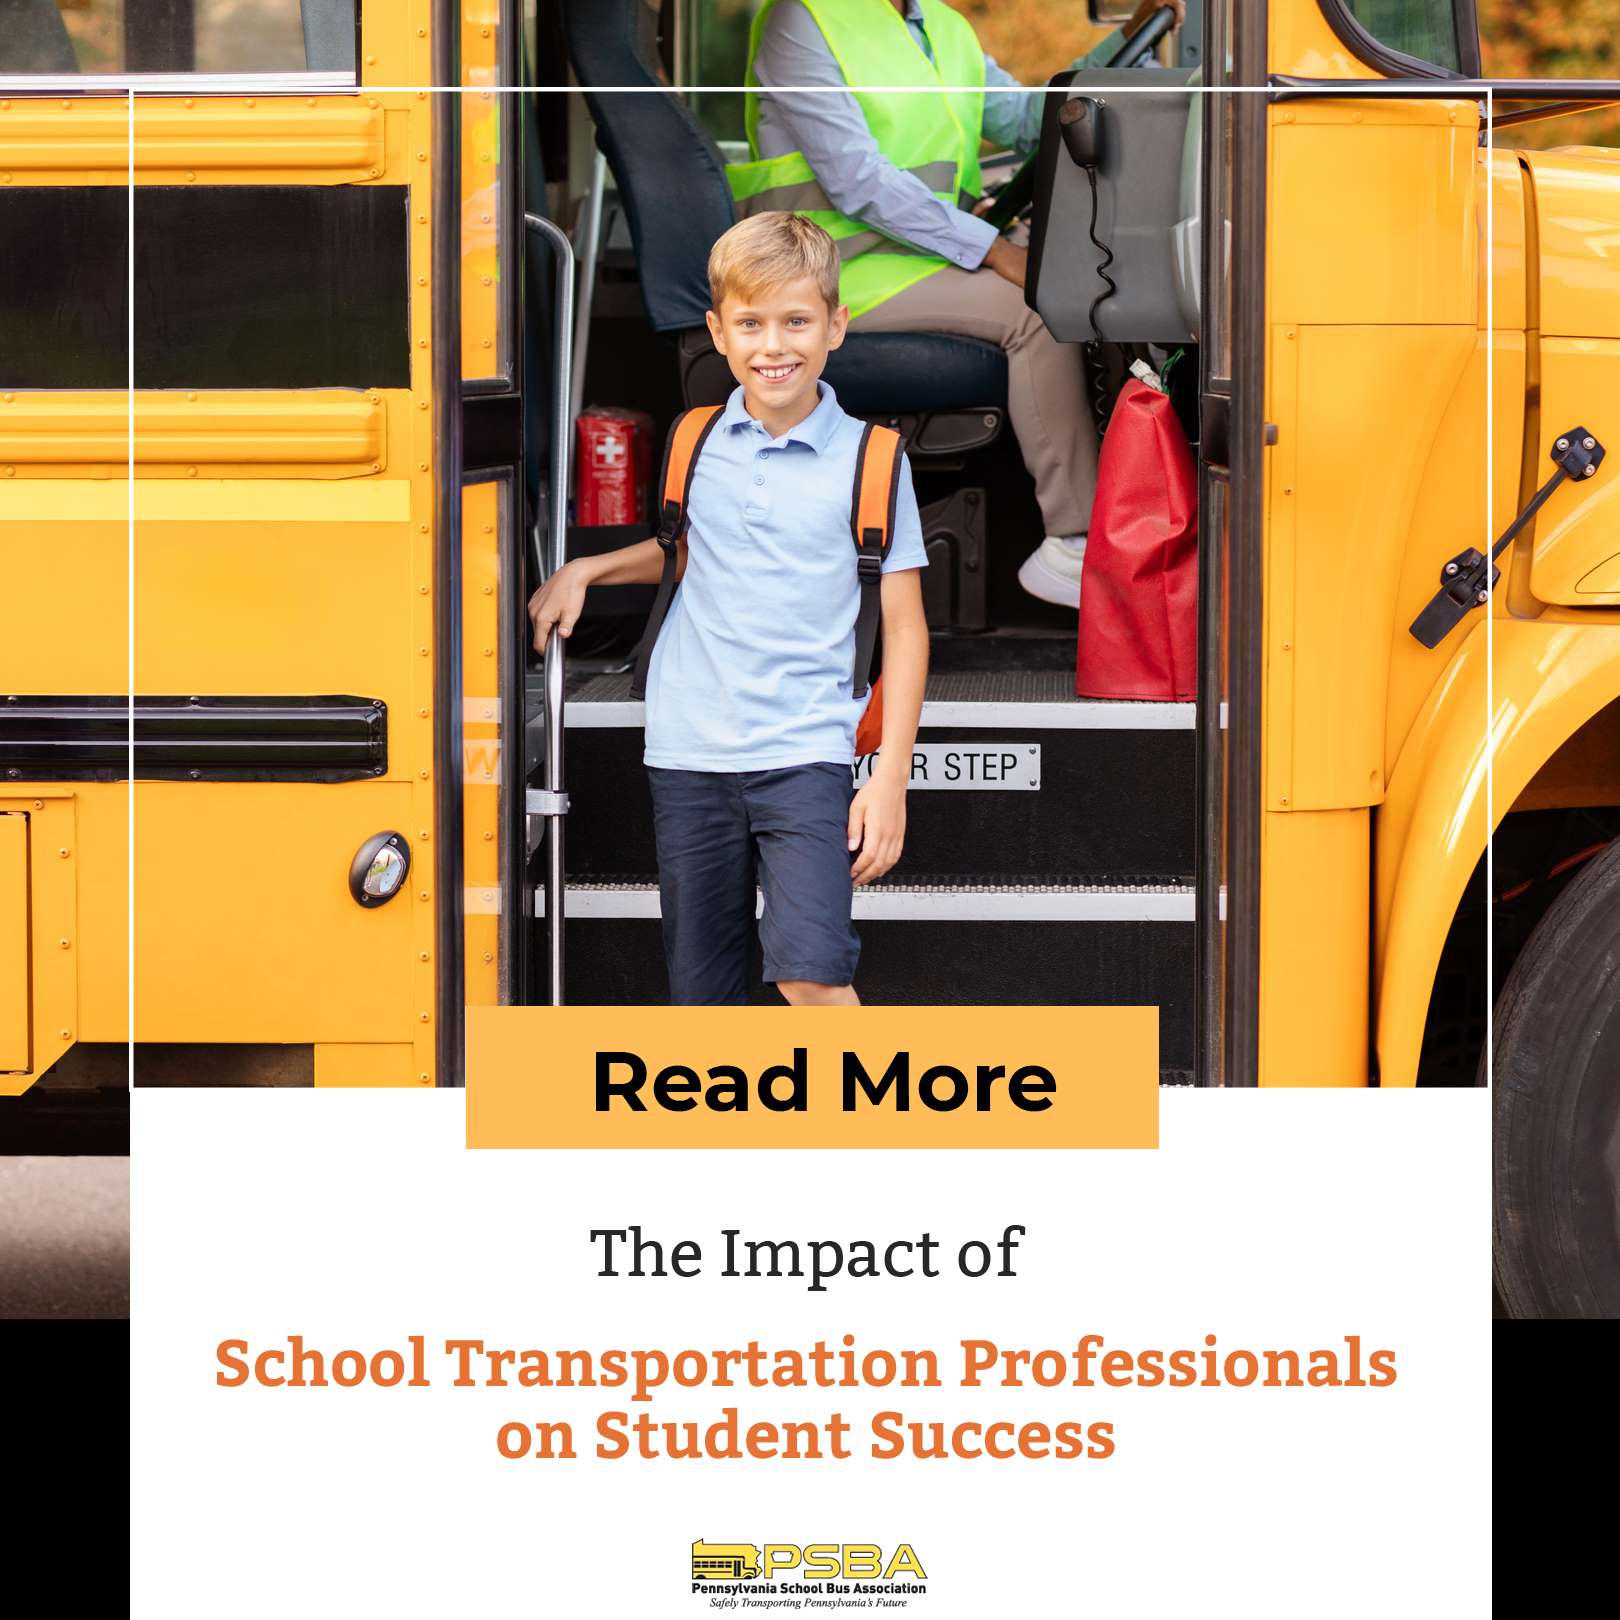 The Impact of School Transportation Professionals on Student Success